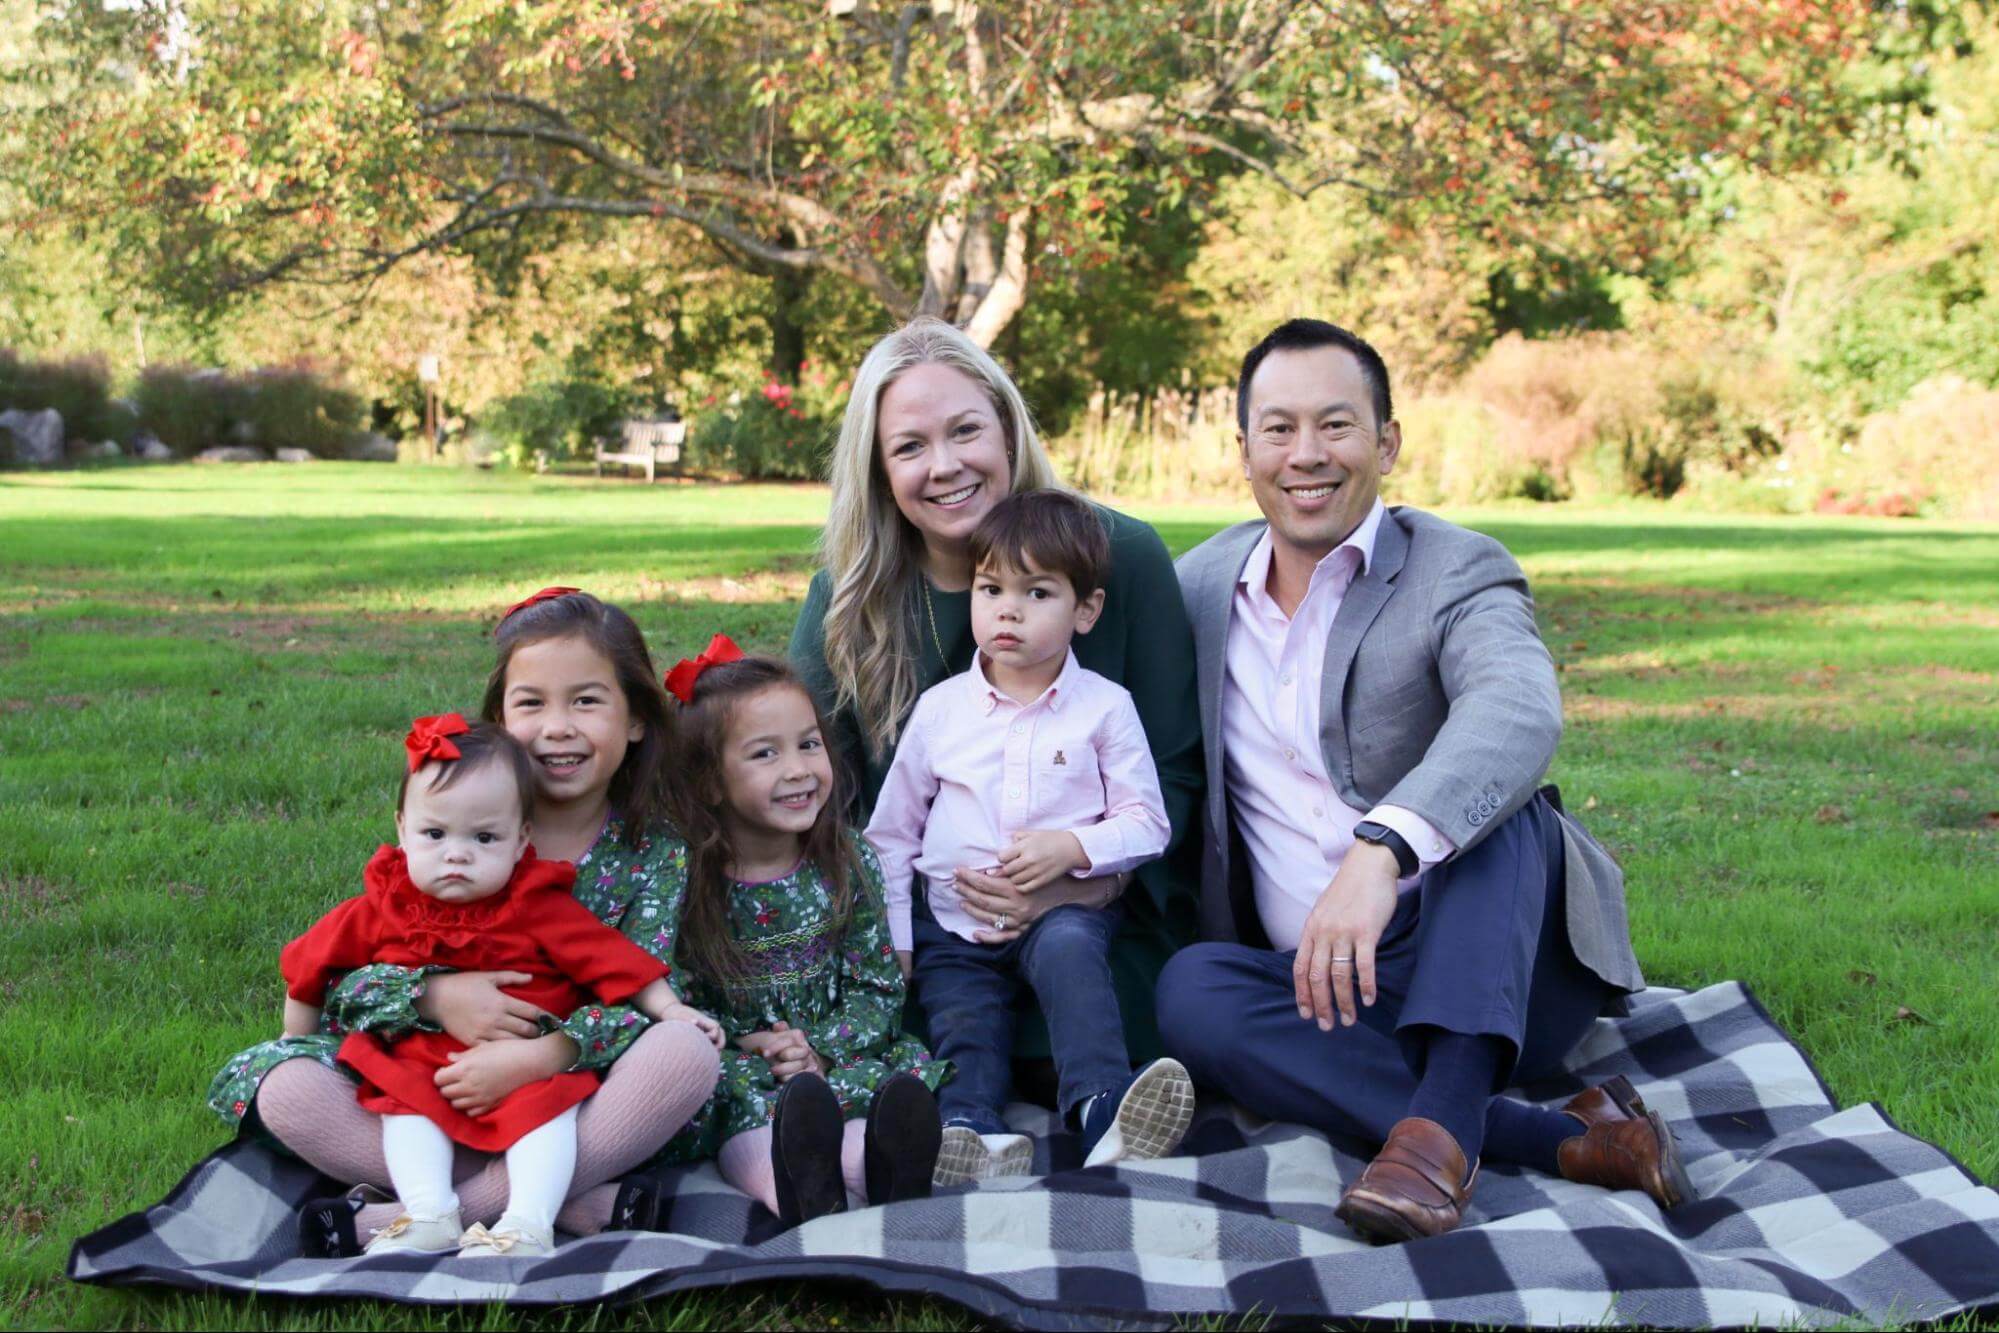 inhaven founder ashley ching with family in park